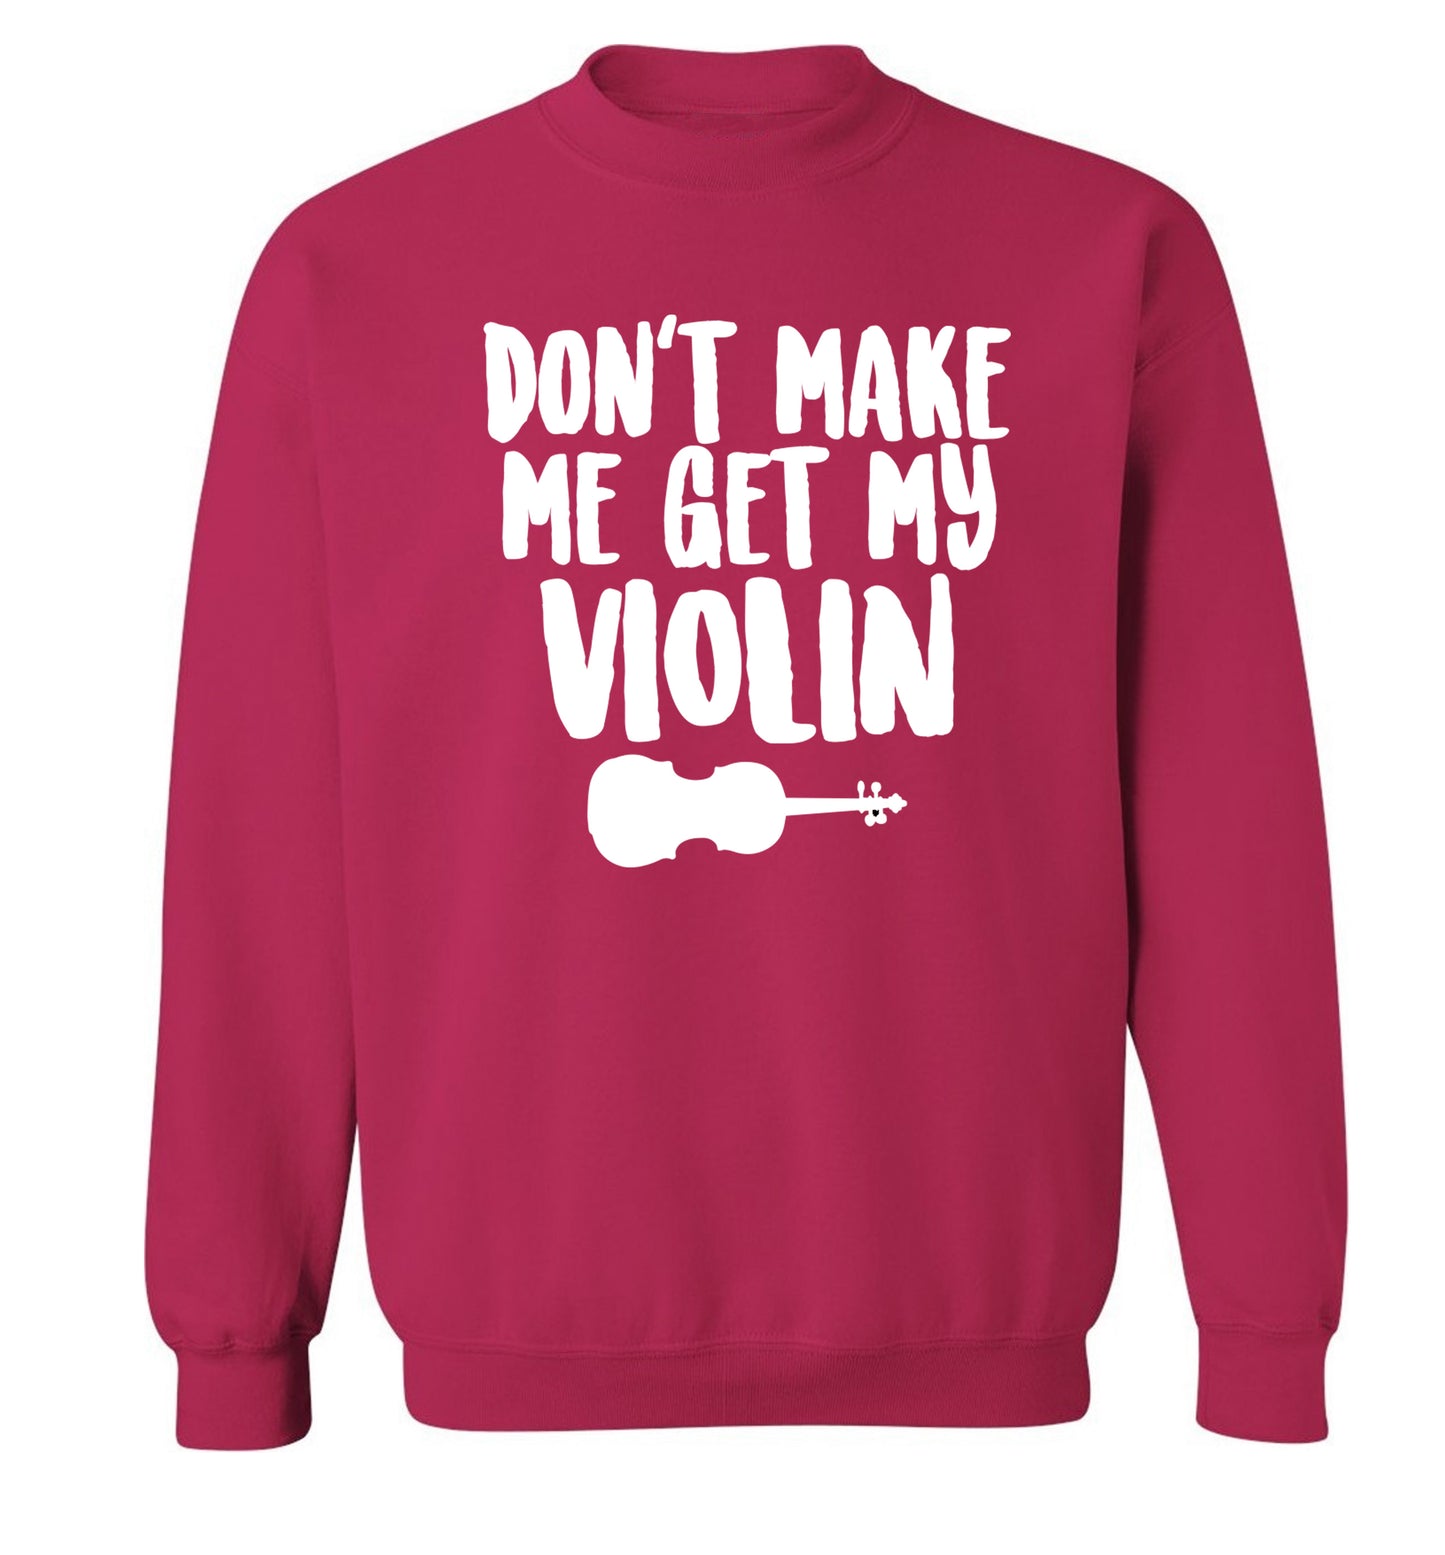 Don't make me get my violin Adult's unisex pink Sweater 2XL